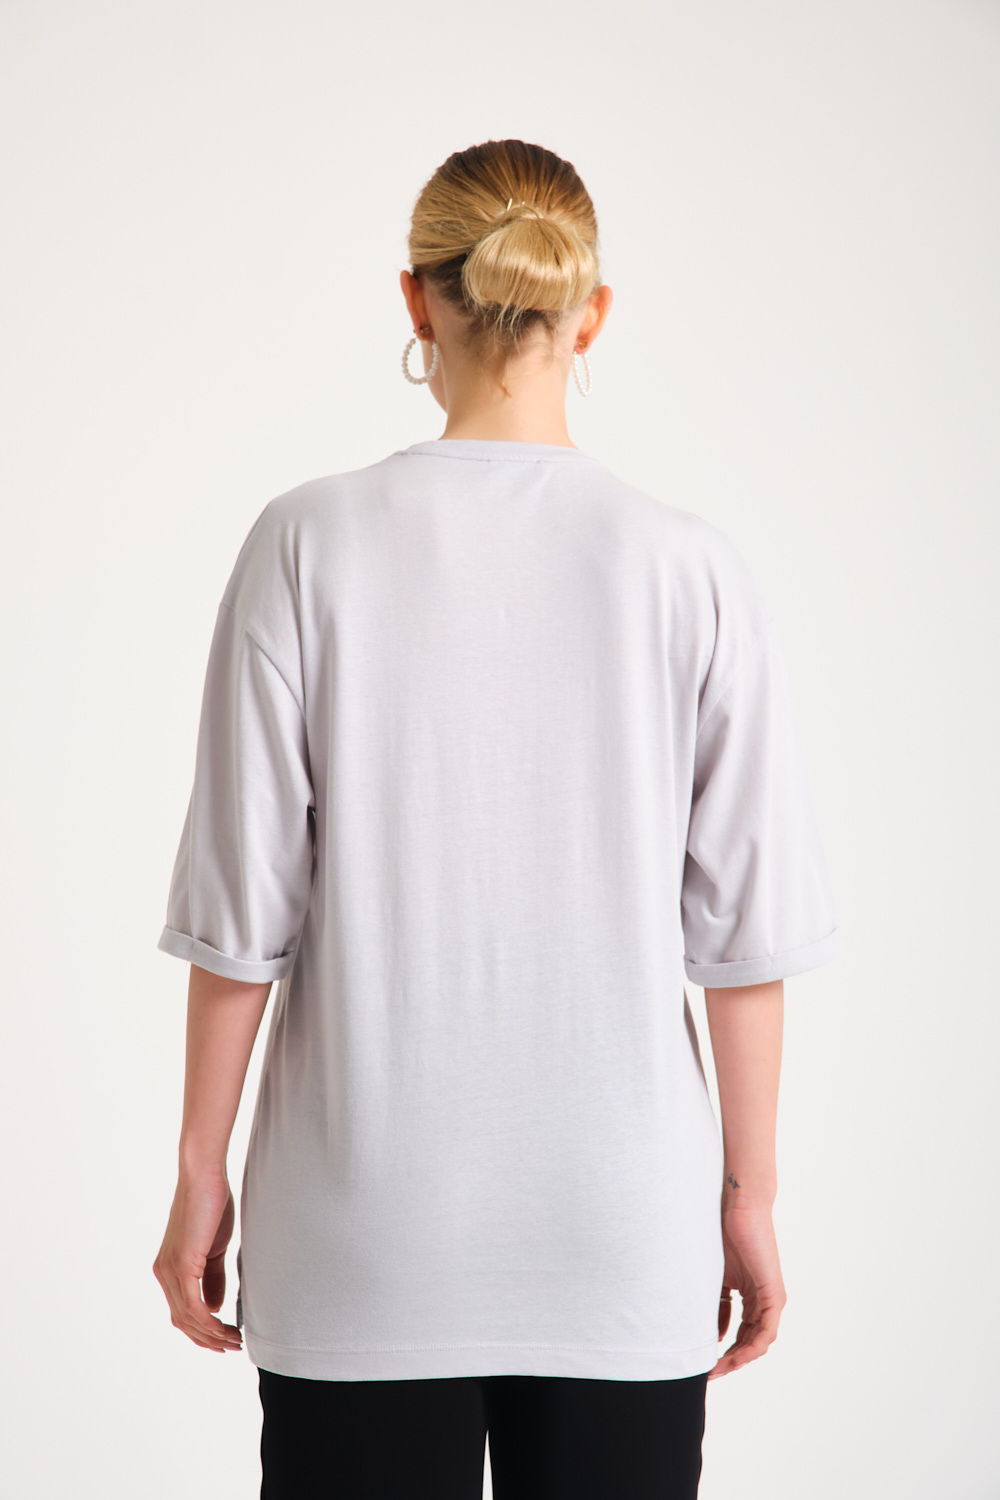 Crew Neck Front Pearl Detailed Gray T-Shirt